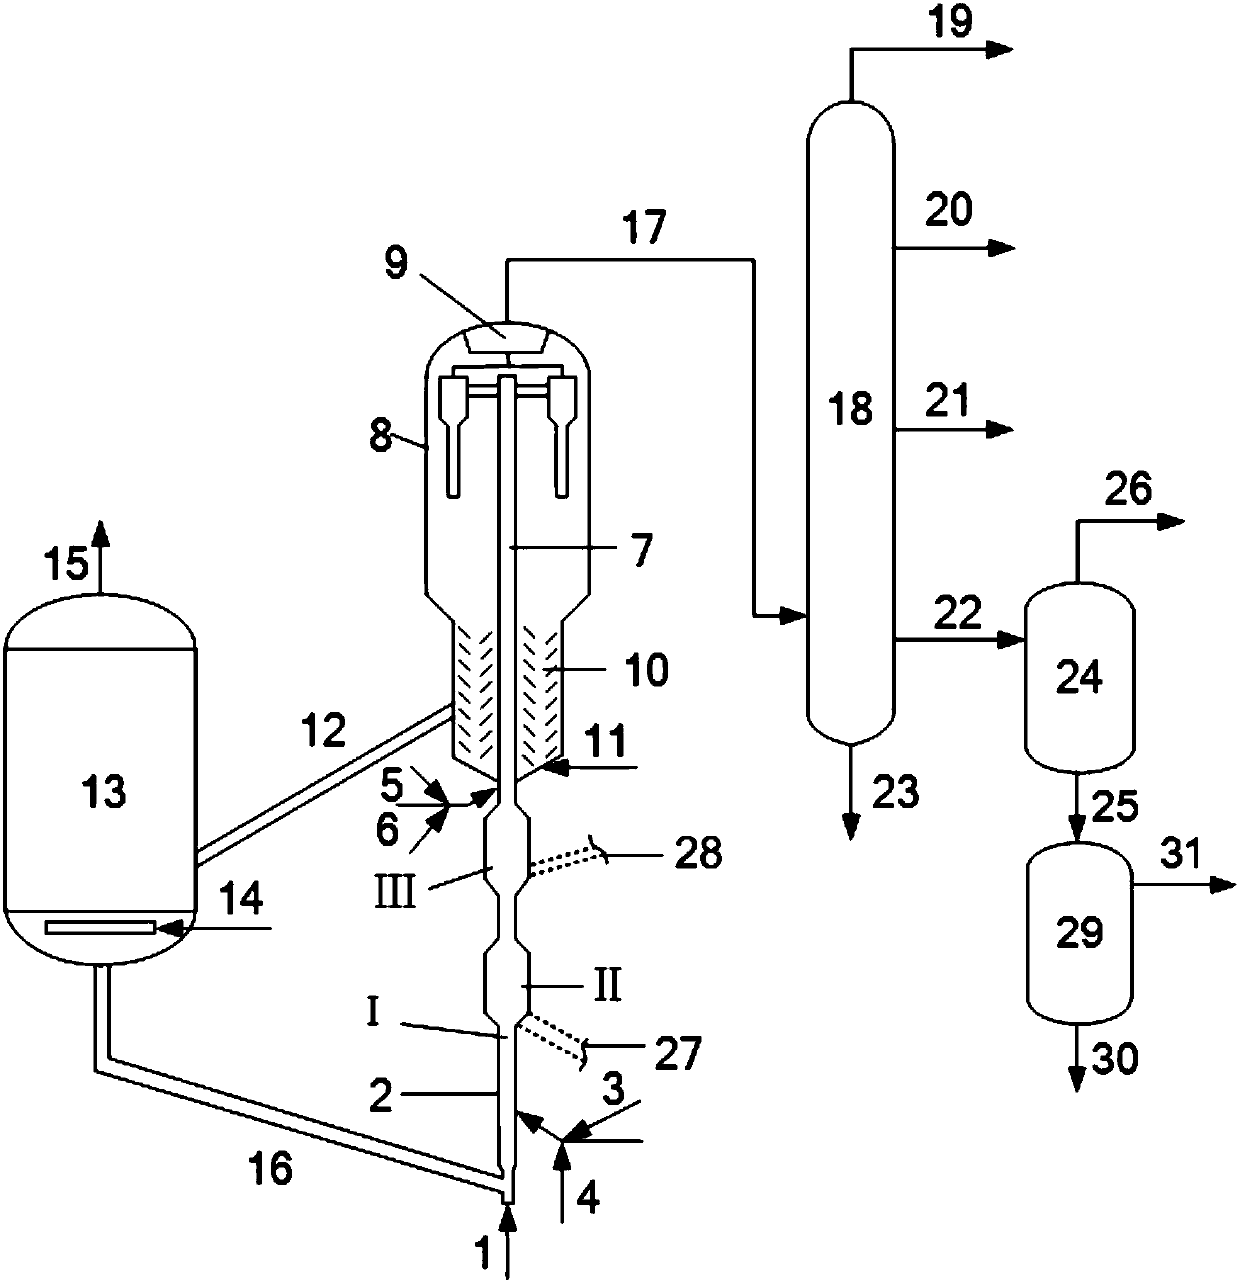 Method and system for catalytic conversion of poor quality raw material oil